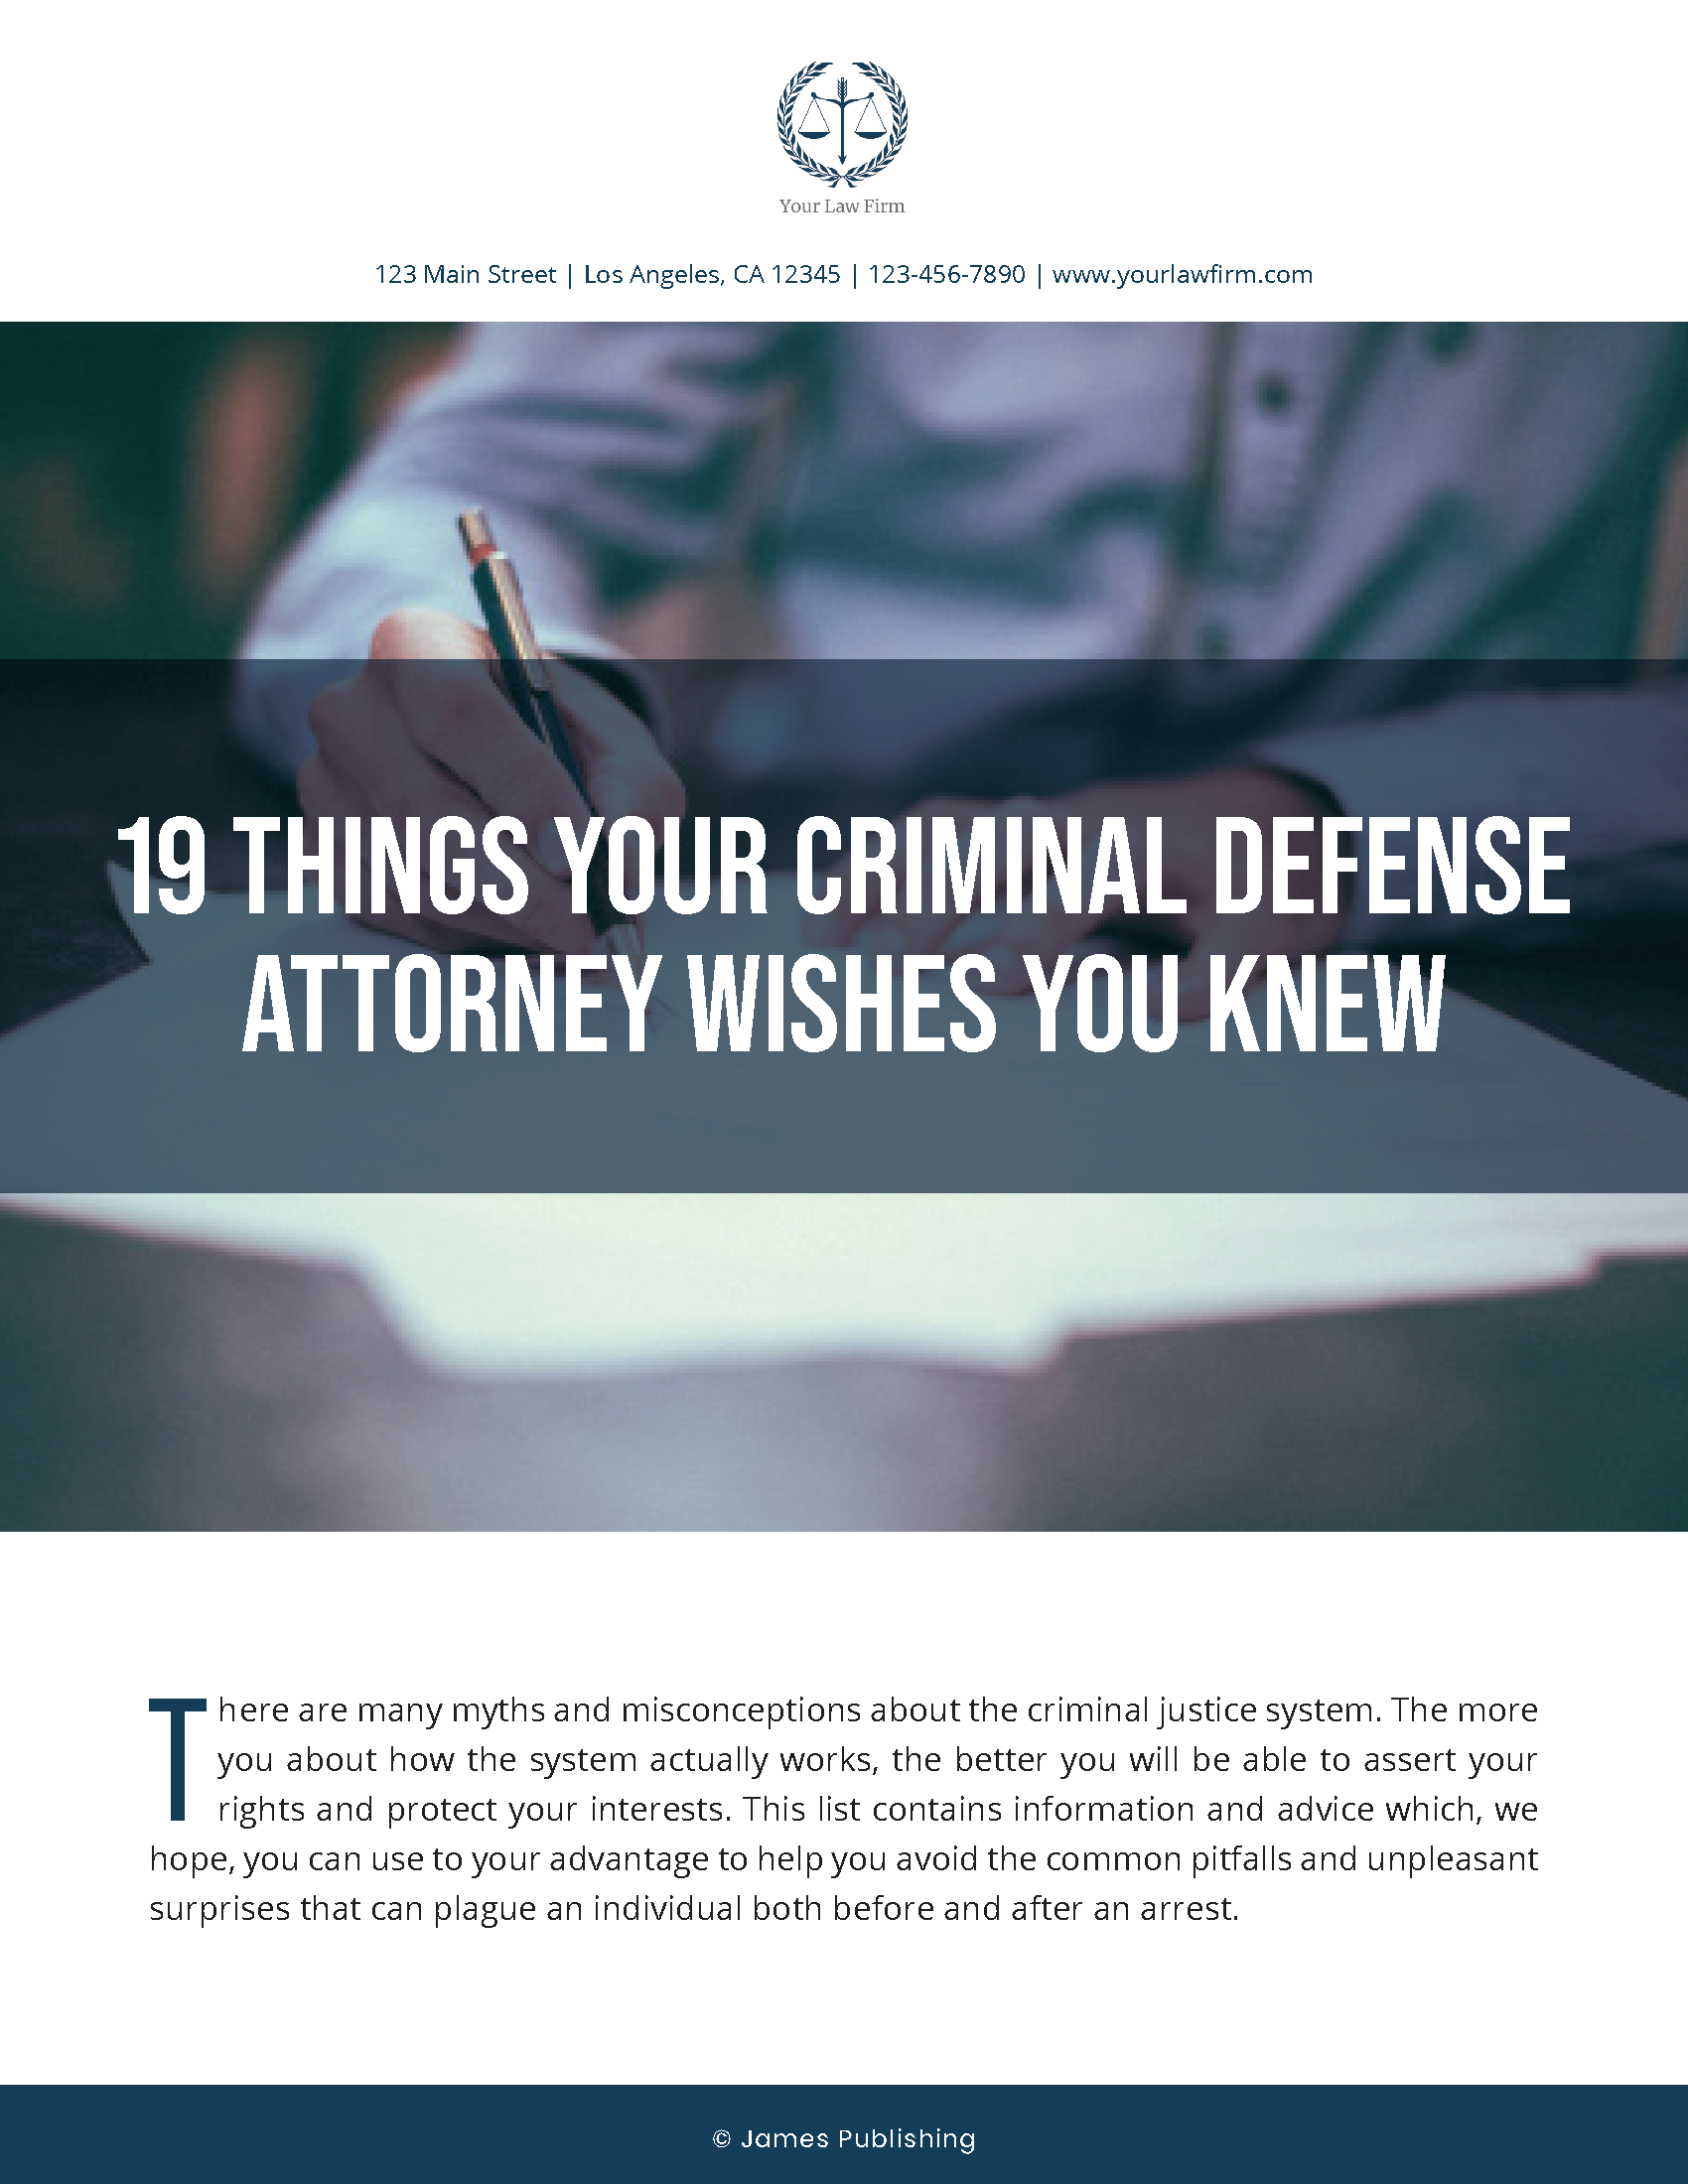 CRIM-04 19 Things Your Criminal Defense Attorney Wishes You Knew